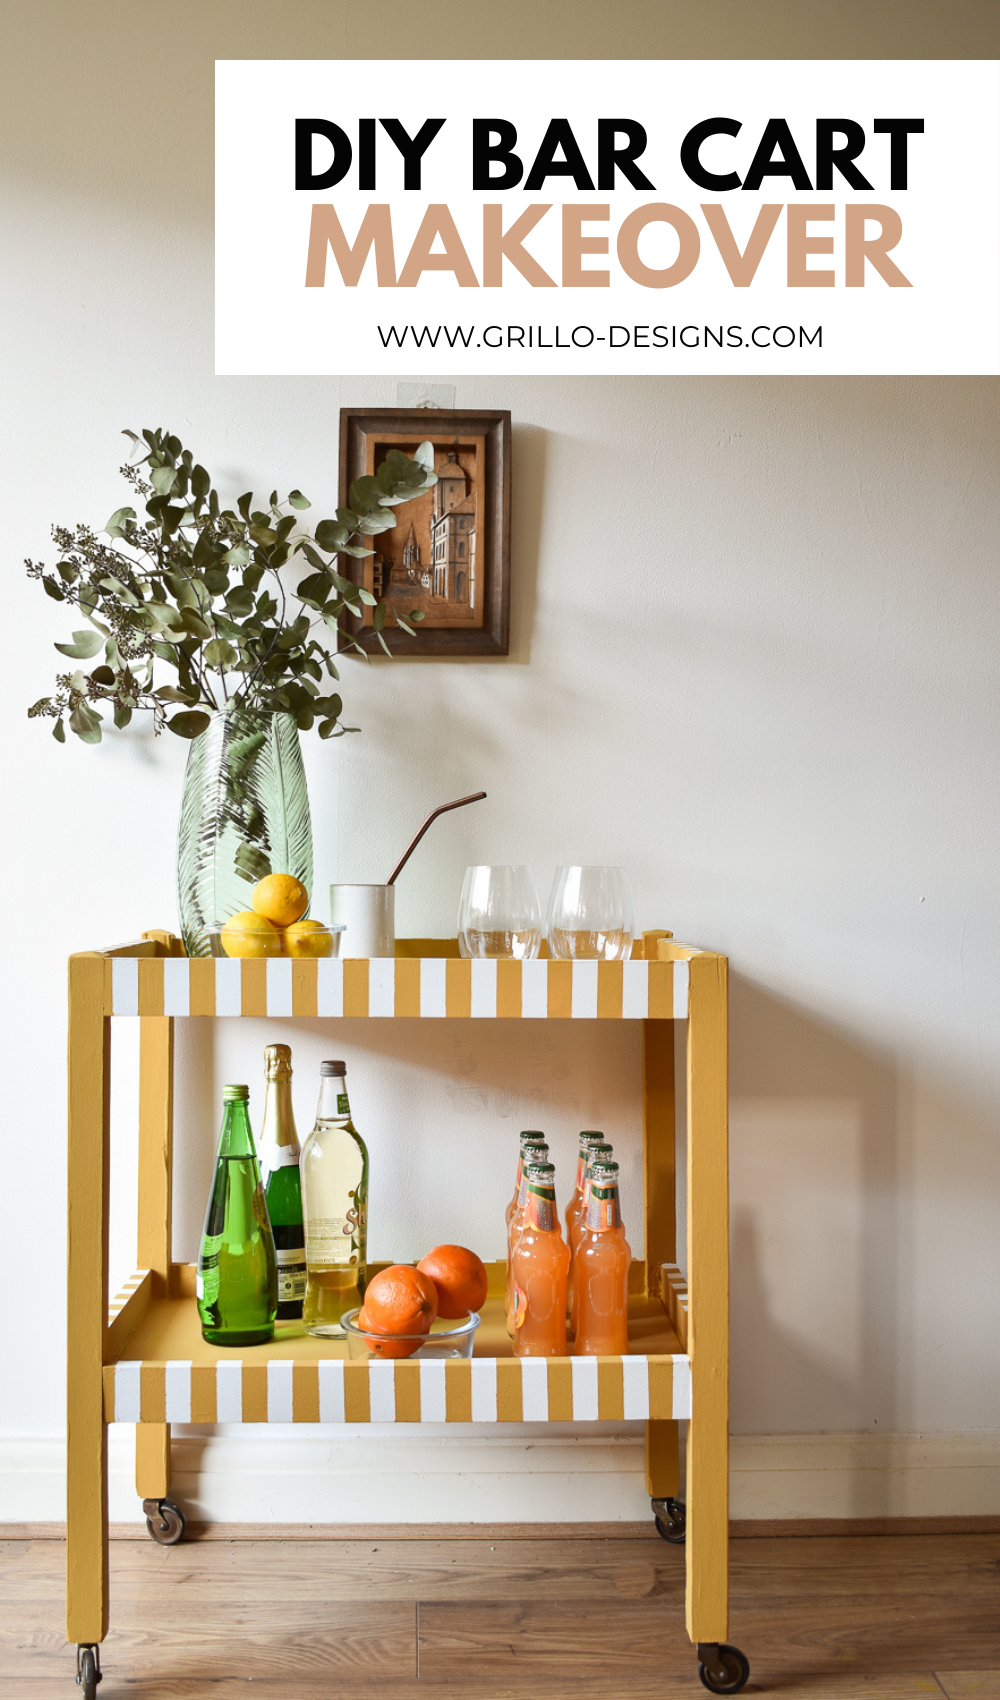 image of painted DIY bar cart makeover with text overlay "DIY bar cart makeover"